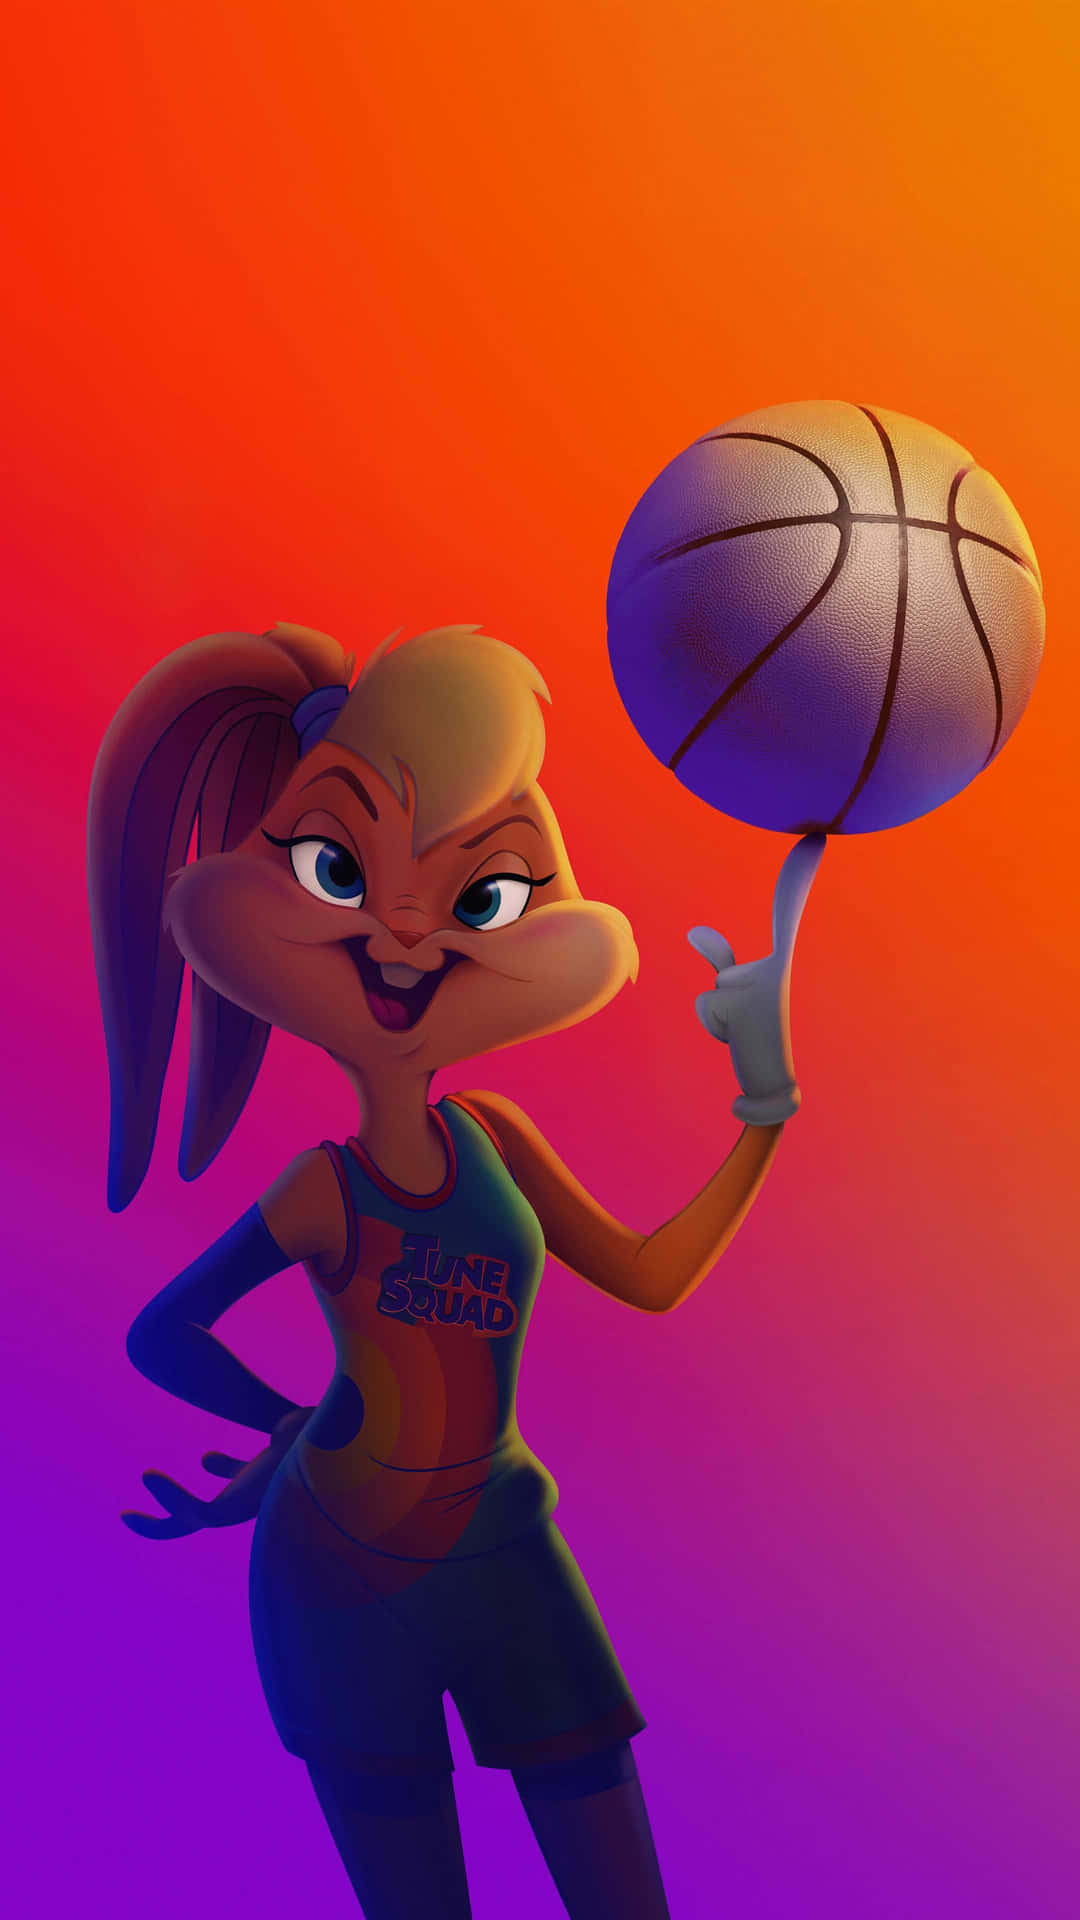 Cool Space Jam Lola Bunny Spinning Ball Wallpaper